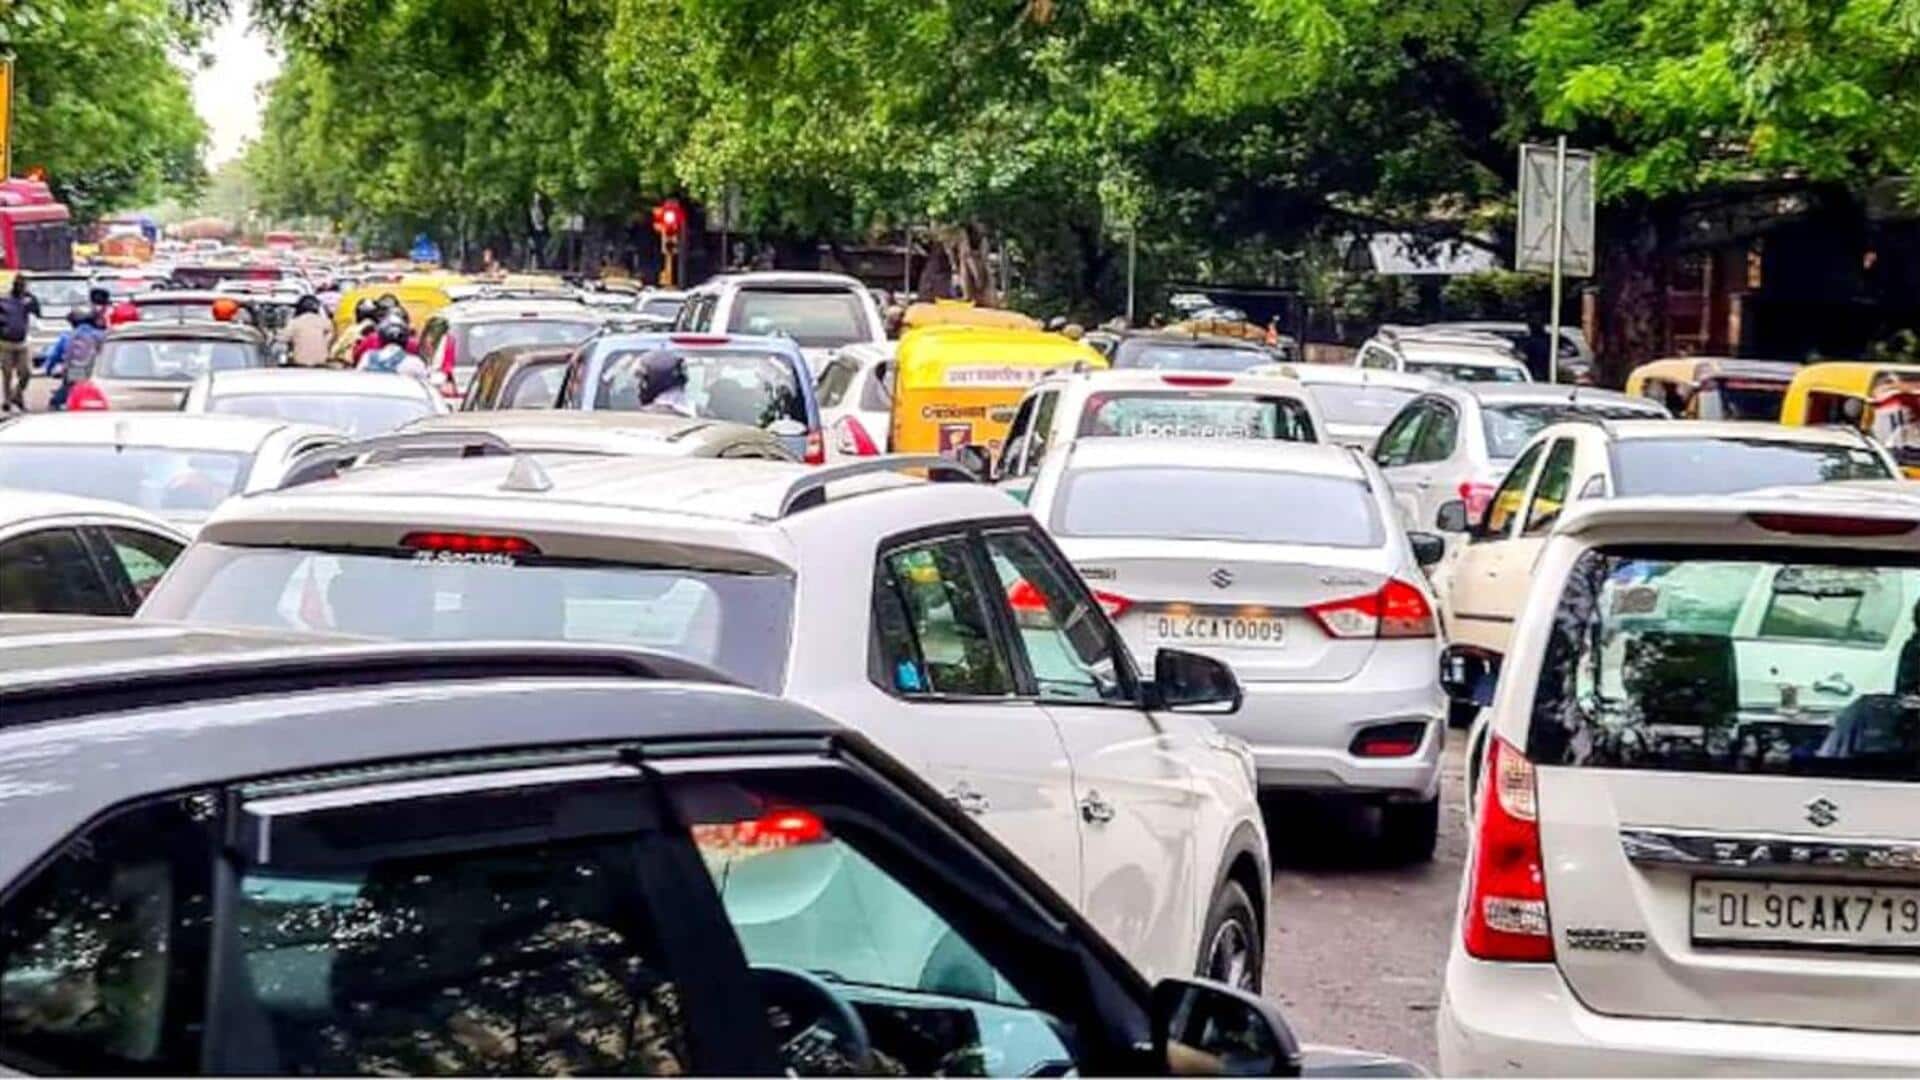 All petrol, diesel car curbs in Delhi removed: Here's why